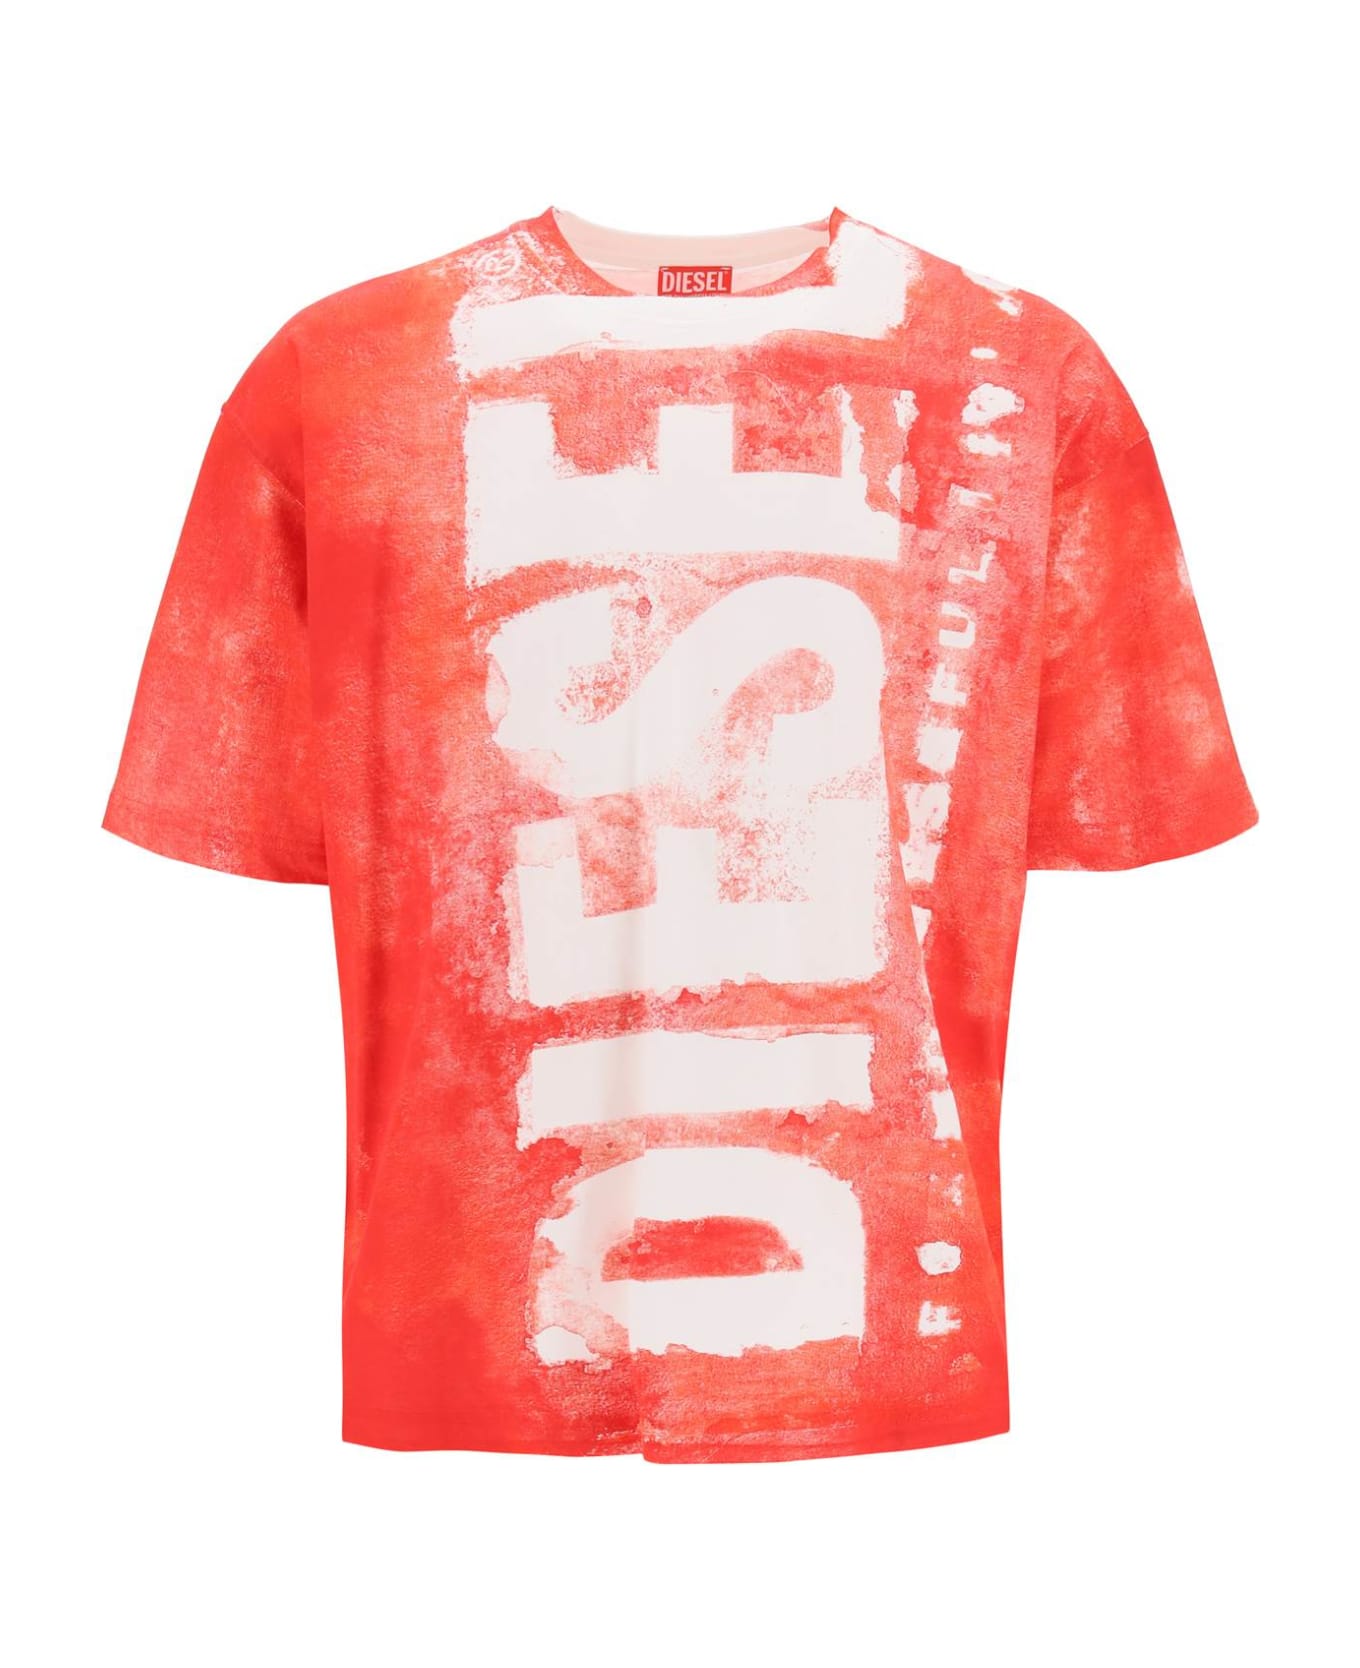 Diesel Printed T-shirt With Oversized Logo - Aa